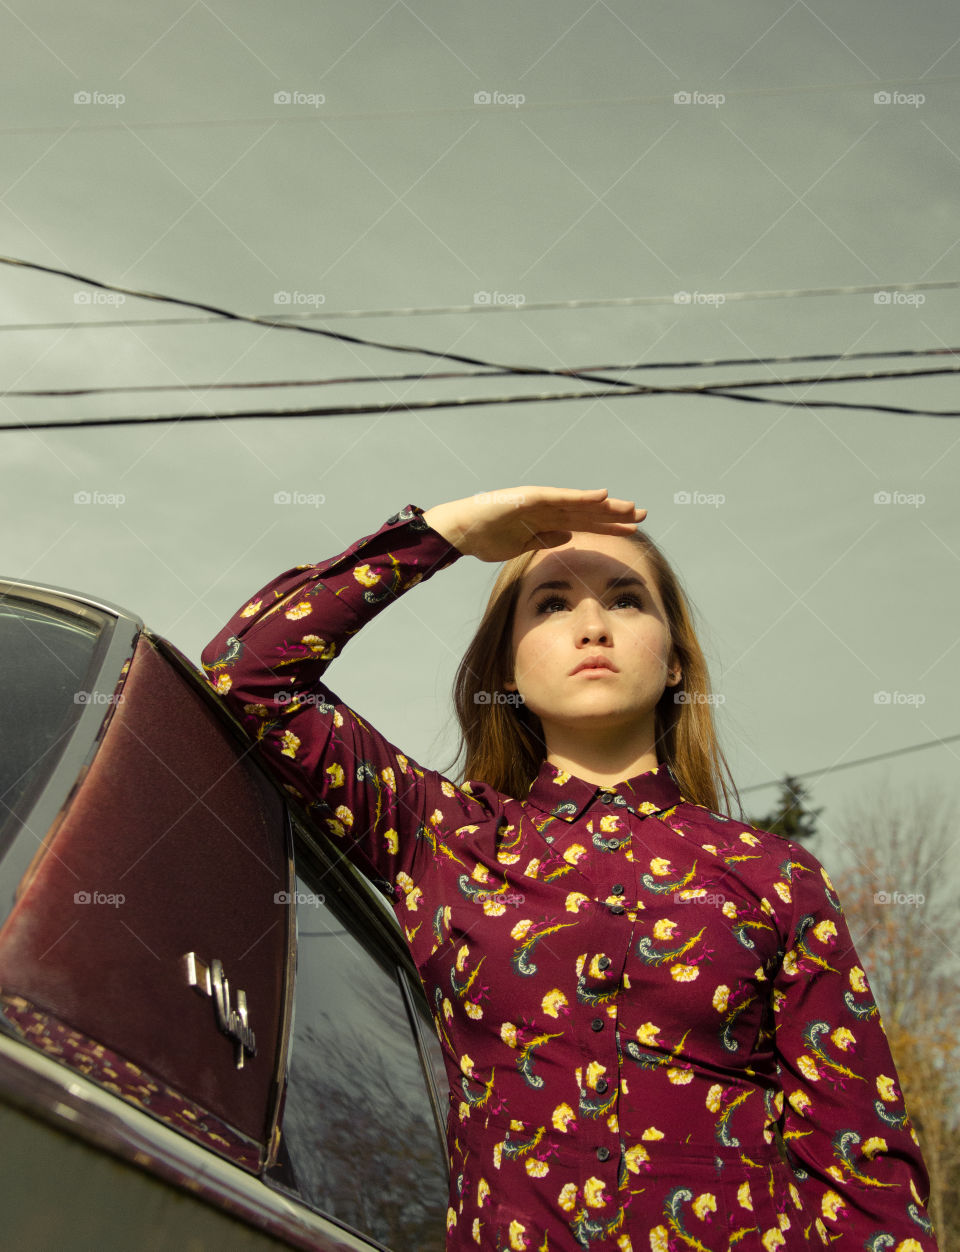 girl looking into distance with maroon dress